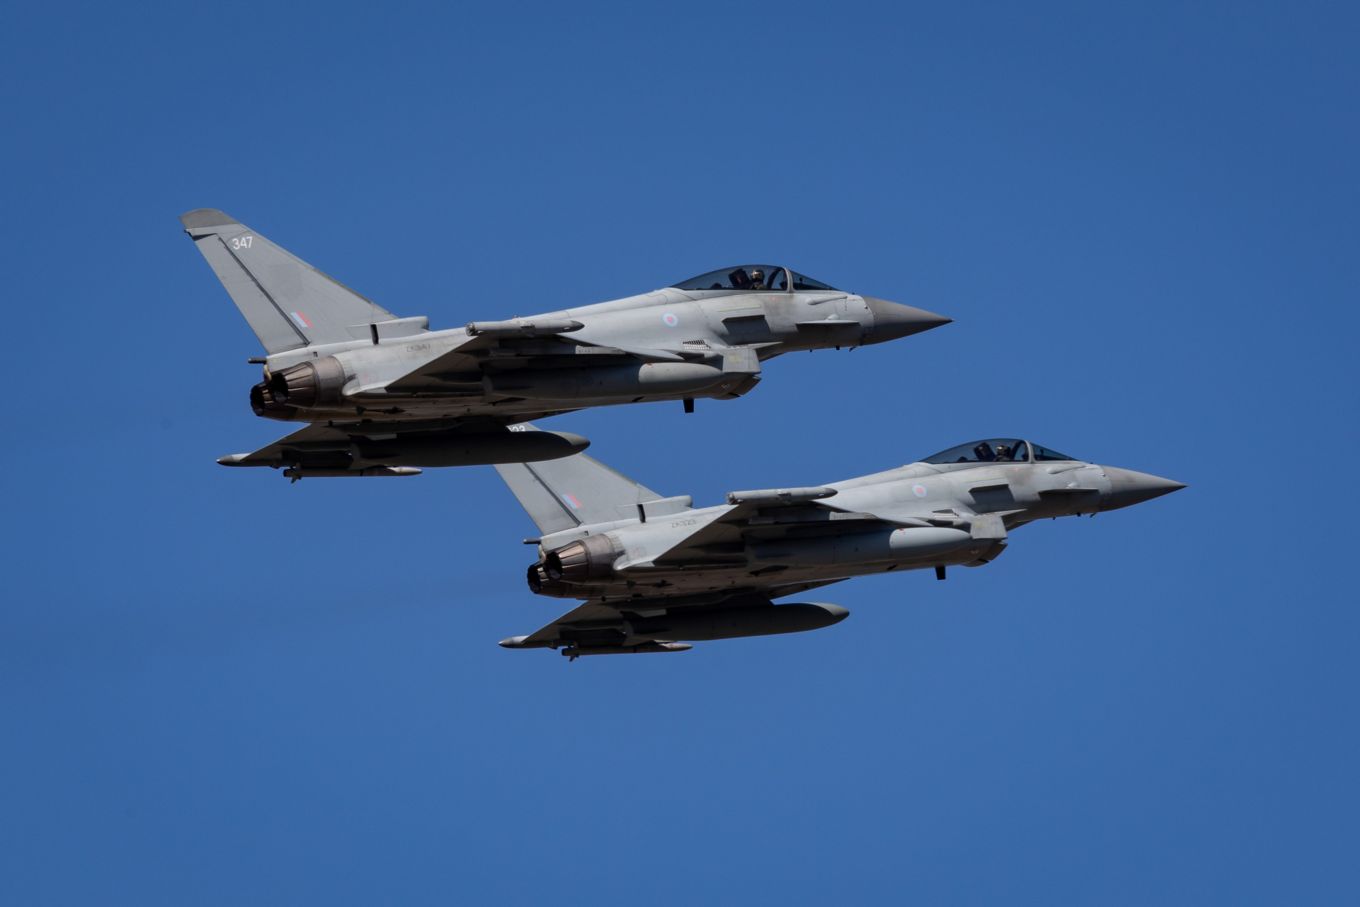 Image shows two RAF Typhoons flying.